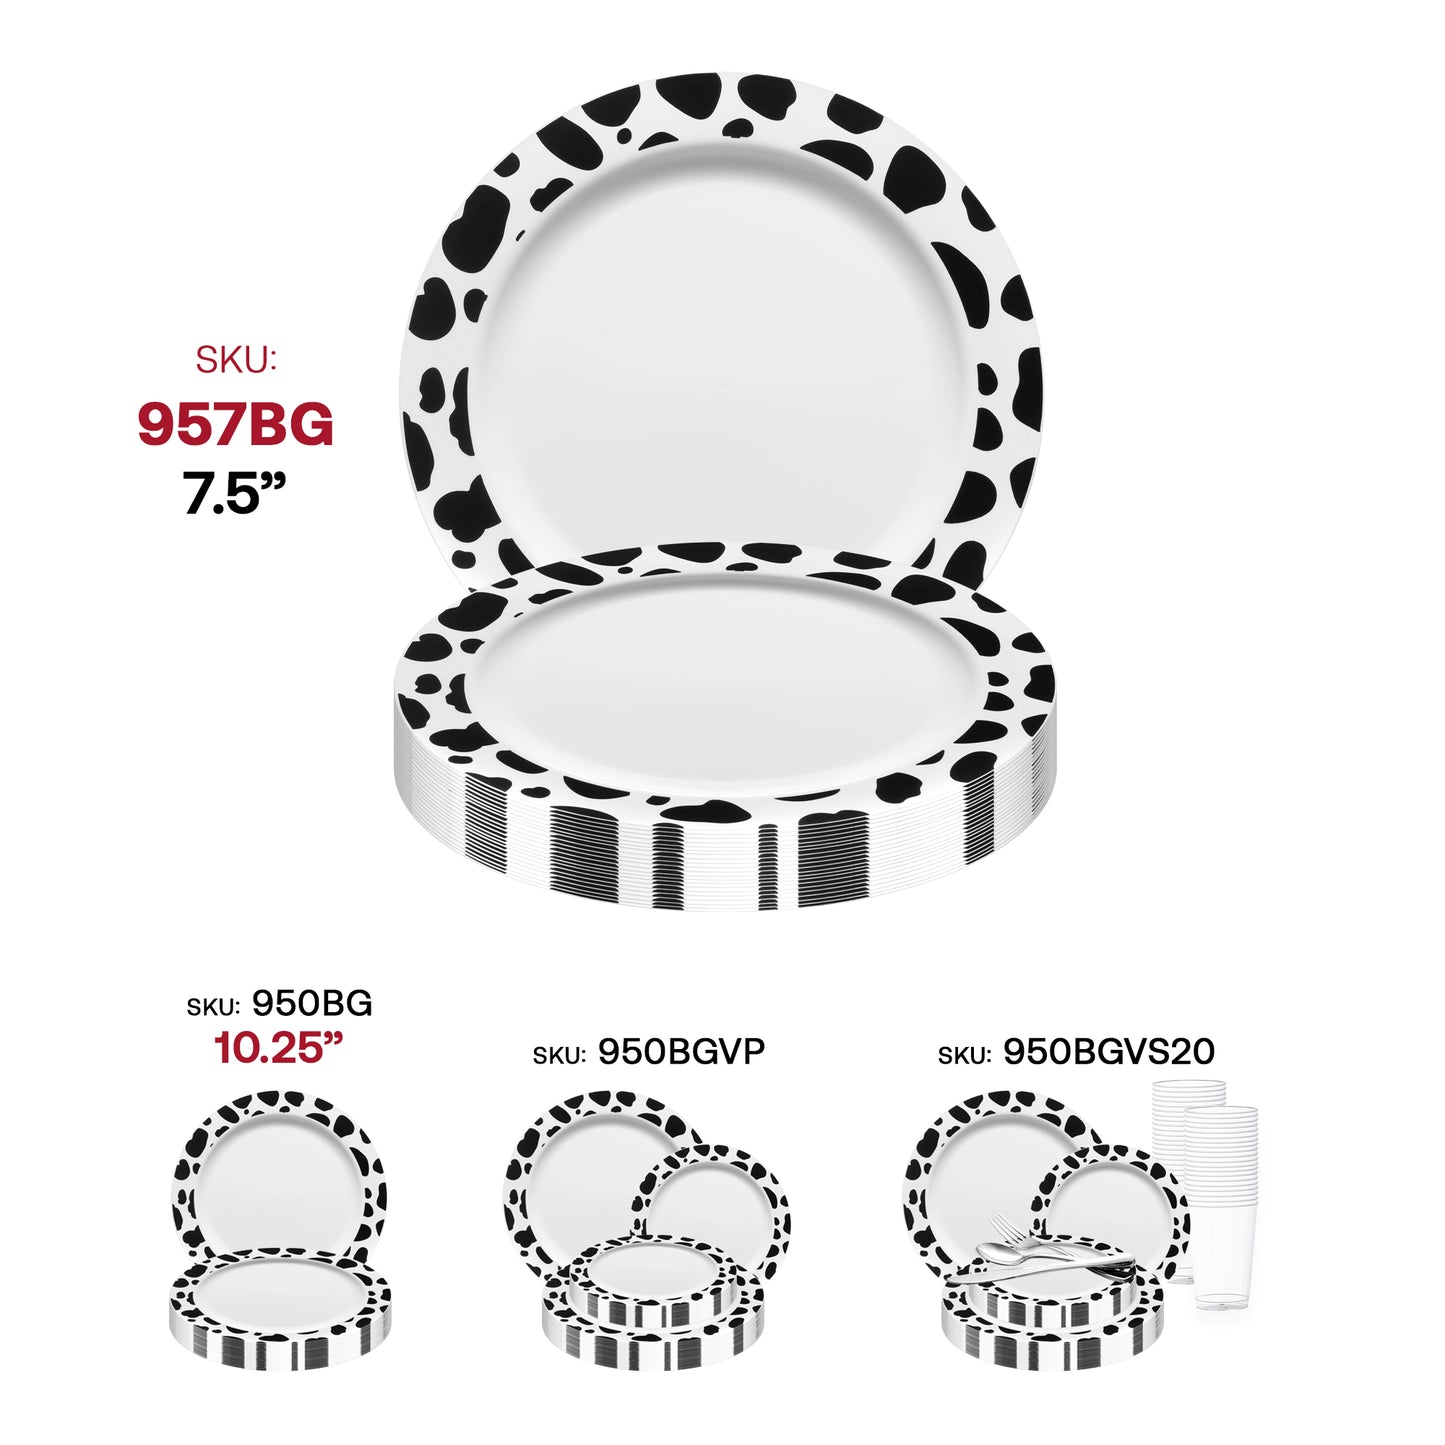 White with Black Dalmatian Spots Round Disposable Plastic Appetizer/Salad Plates (7.5") SKU | The Kaya Collection